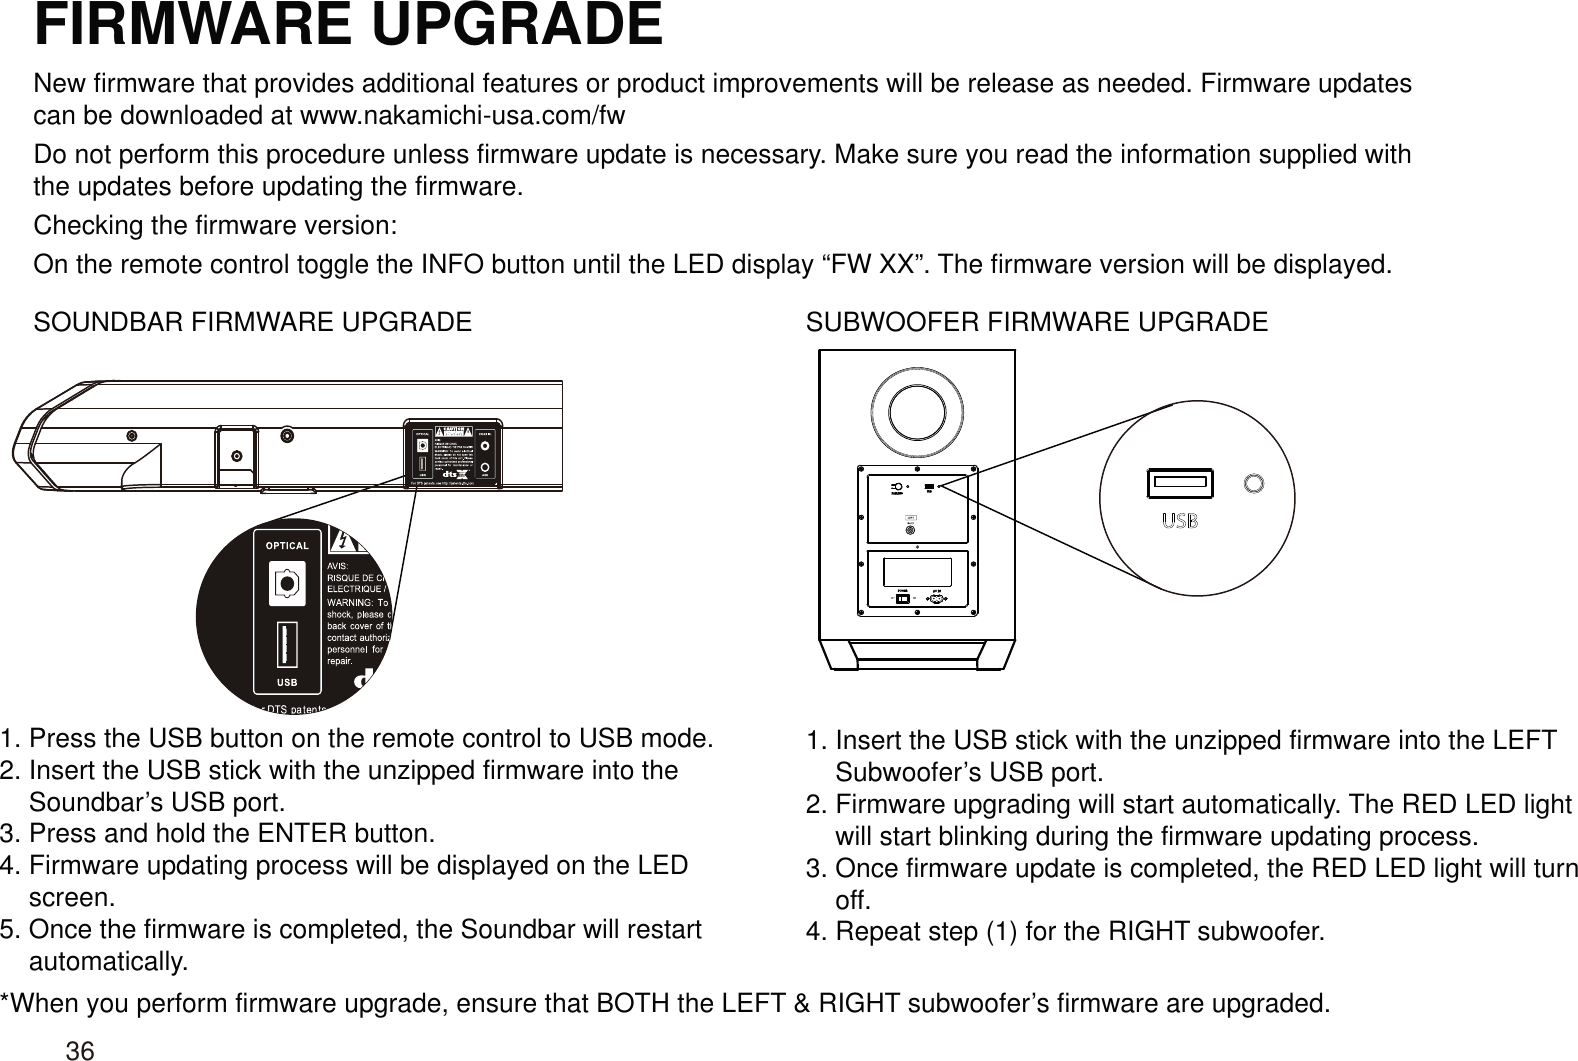 FIRMWARE UPGRADENew firmware that provides additional features or product improvements will be release as needed. Firmware updates can be downloaded at www.nakamichi-usa.com/fwDo not perform this procedure unless firmware update is necessary. Make sure you read the information supplied with the updates before updating the firmware.Checking the firmware version:On the remote control toggle the INFO button until the LED display “FW XX”. The firmware version will be displayed.SOUNDBAR FIRMWARE UPGRADE SUBWOOFER FIRMWARE UPGRADE1. Press the USB button on the remote control to USB mode.2. Insert the USB stick with the unzipped firmware into the     Soundbar’s USB port.3. Press and hold the ENTER button.4. Firmware updating process will be displayed on the LED     screen.5. Once the firmware is completed, the Soundbar will restart     automatically.1. Insert the USB stick with the unzipped firmware into the LEFT     Subwoofer’s USB port.2. Firmware upgrading will start automatically. The RED LED light     will start blinking during the firmware updating process.3. Once firmware update is completed, the RED LED light will turn     off.4. Repeat step (1) for the RIGHT subwoofer.*When you perform firmware upgrade, ensure that BOTH the LEFT &amp; RIGHT subwoofer’s firmware are upgraded.36